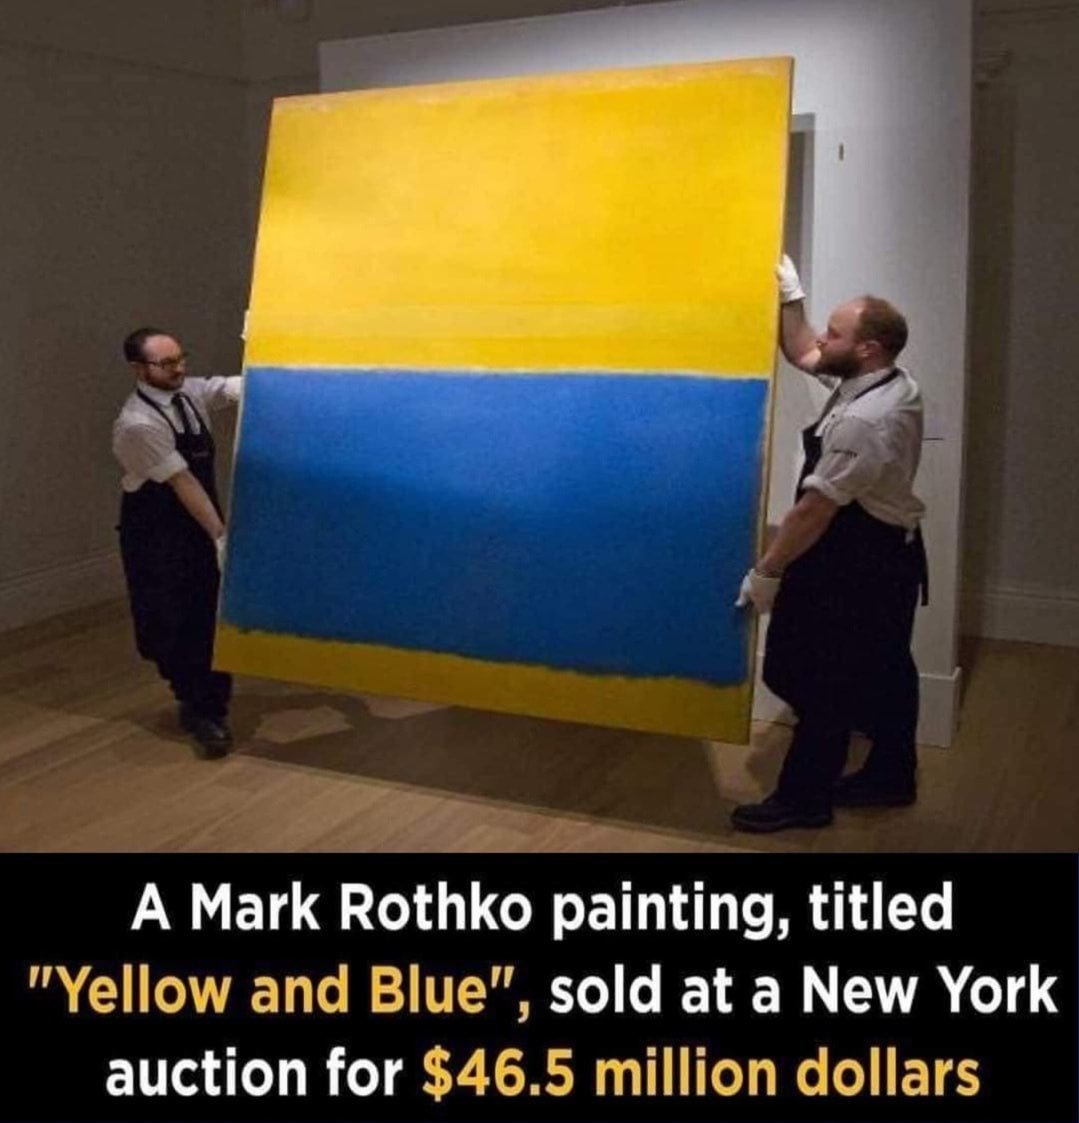 Today’s art world is plagued by accusations of tax evasion and money laundering (many of them proven). We see splashes of paint sell for millions and wonder: is name value enough to drive prices, or is something else going on?